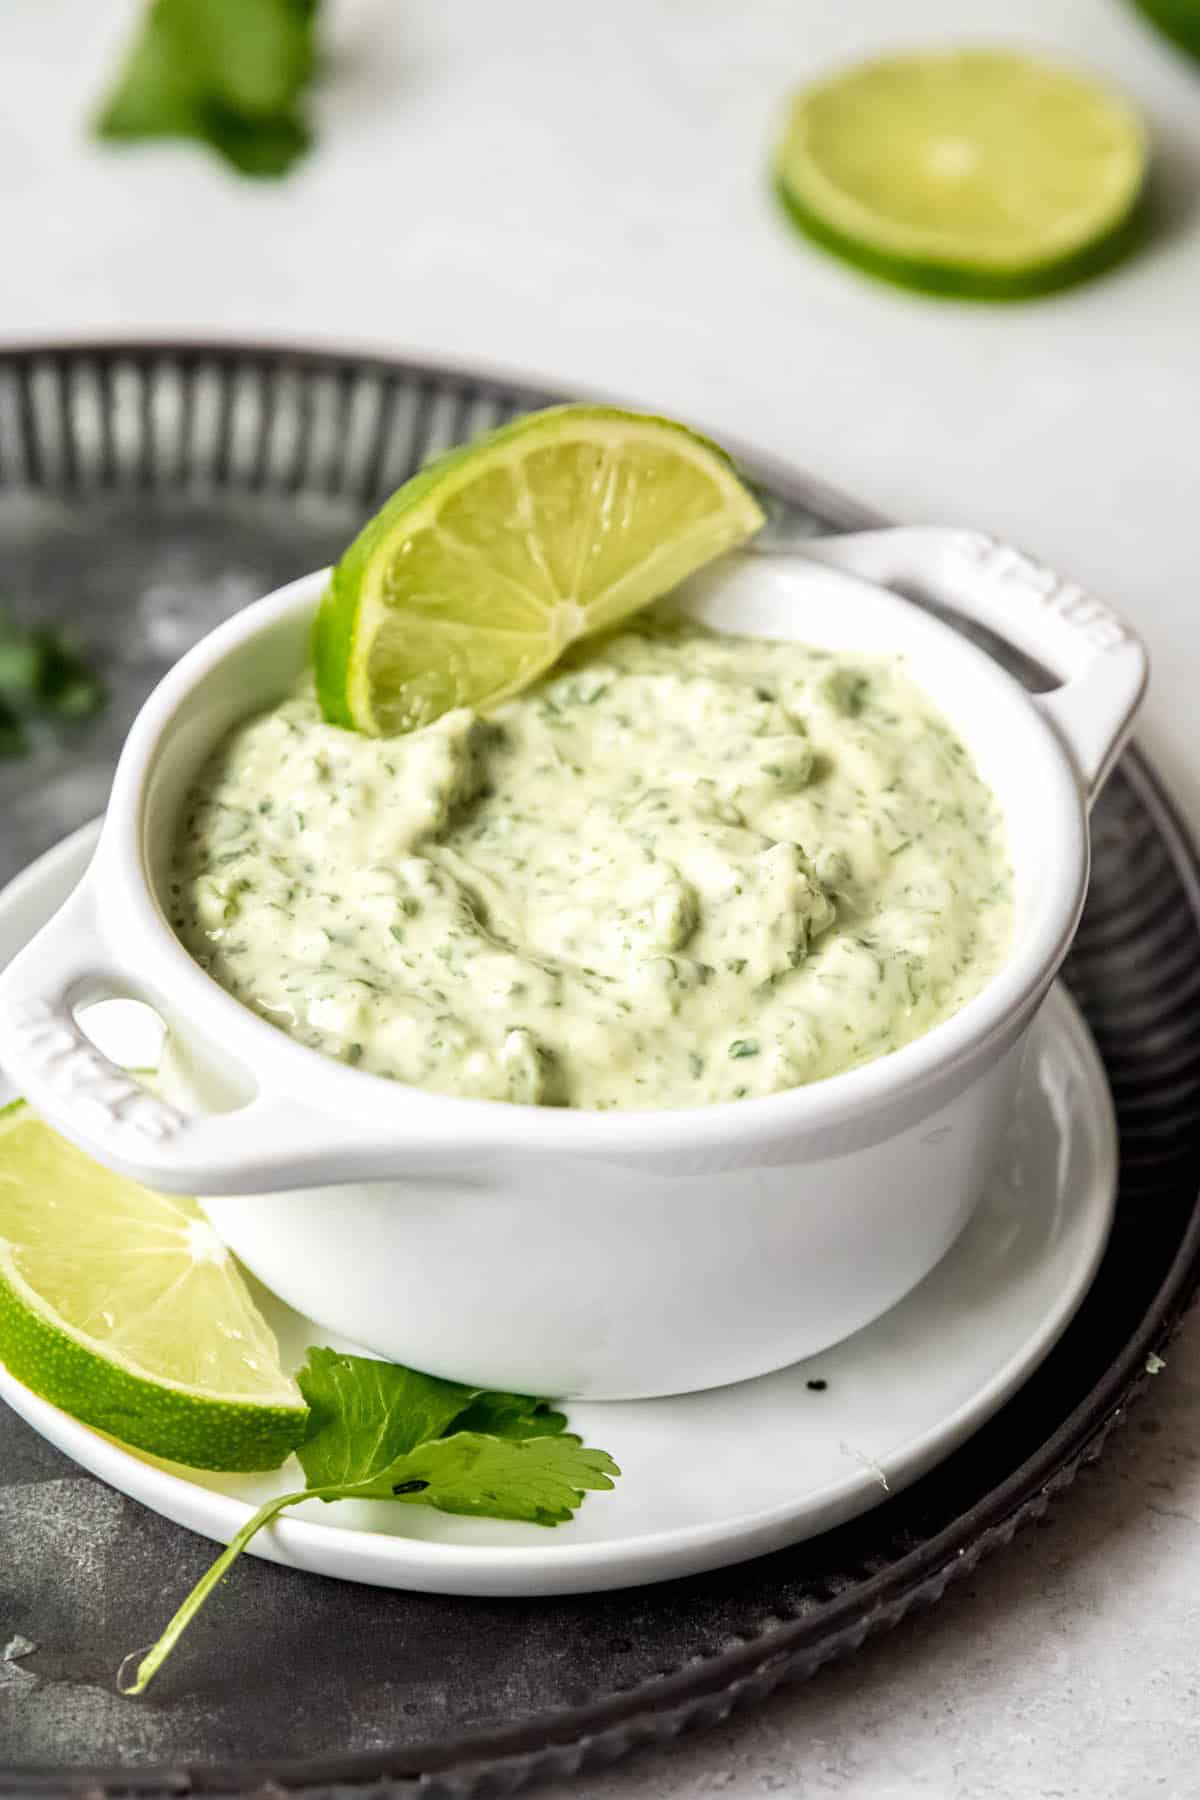 white dip bowl filled with creamy jalapeno garlic sauce with a sprig of cilantro.